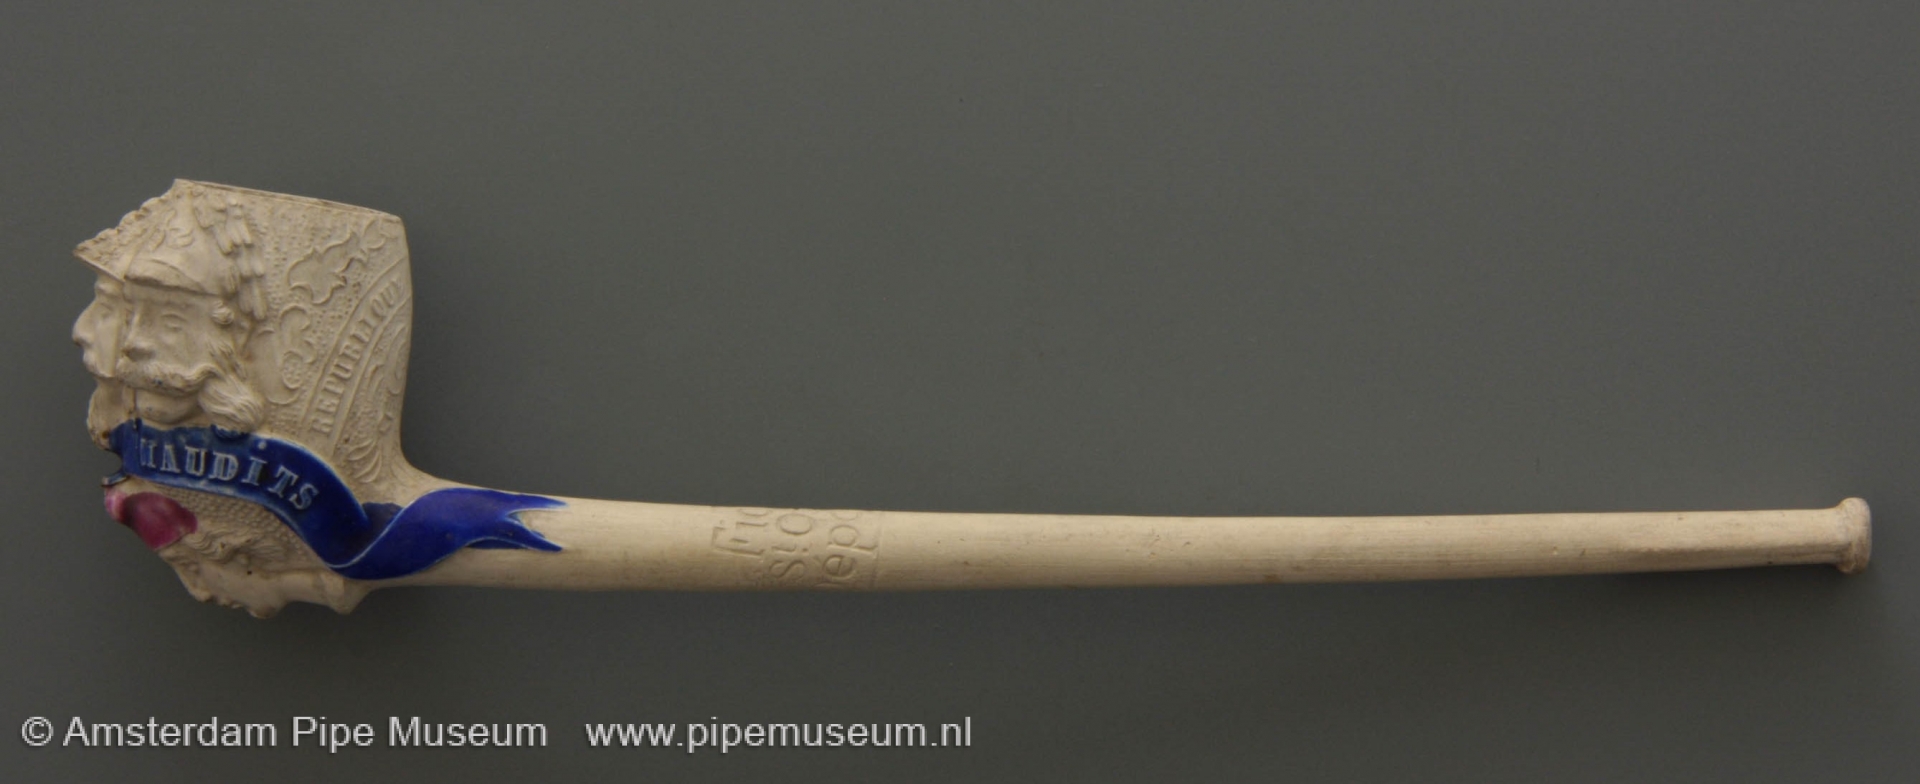 01-19.272-clay-tobacco-pipe-louis-fiolet-trois-maudits-01